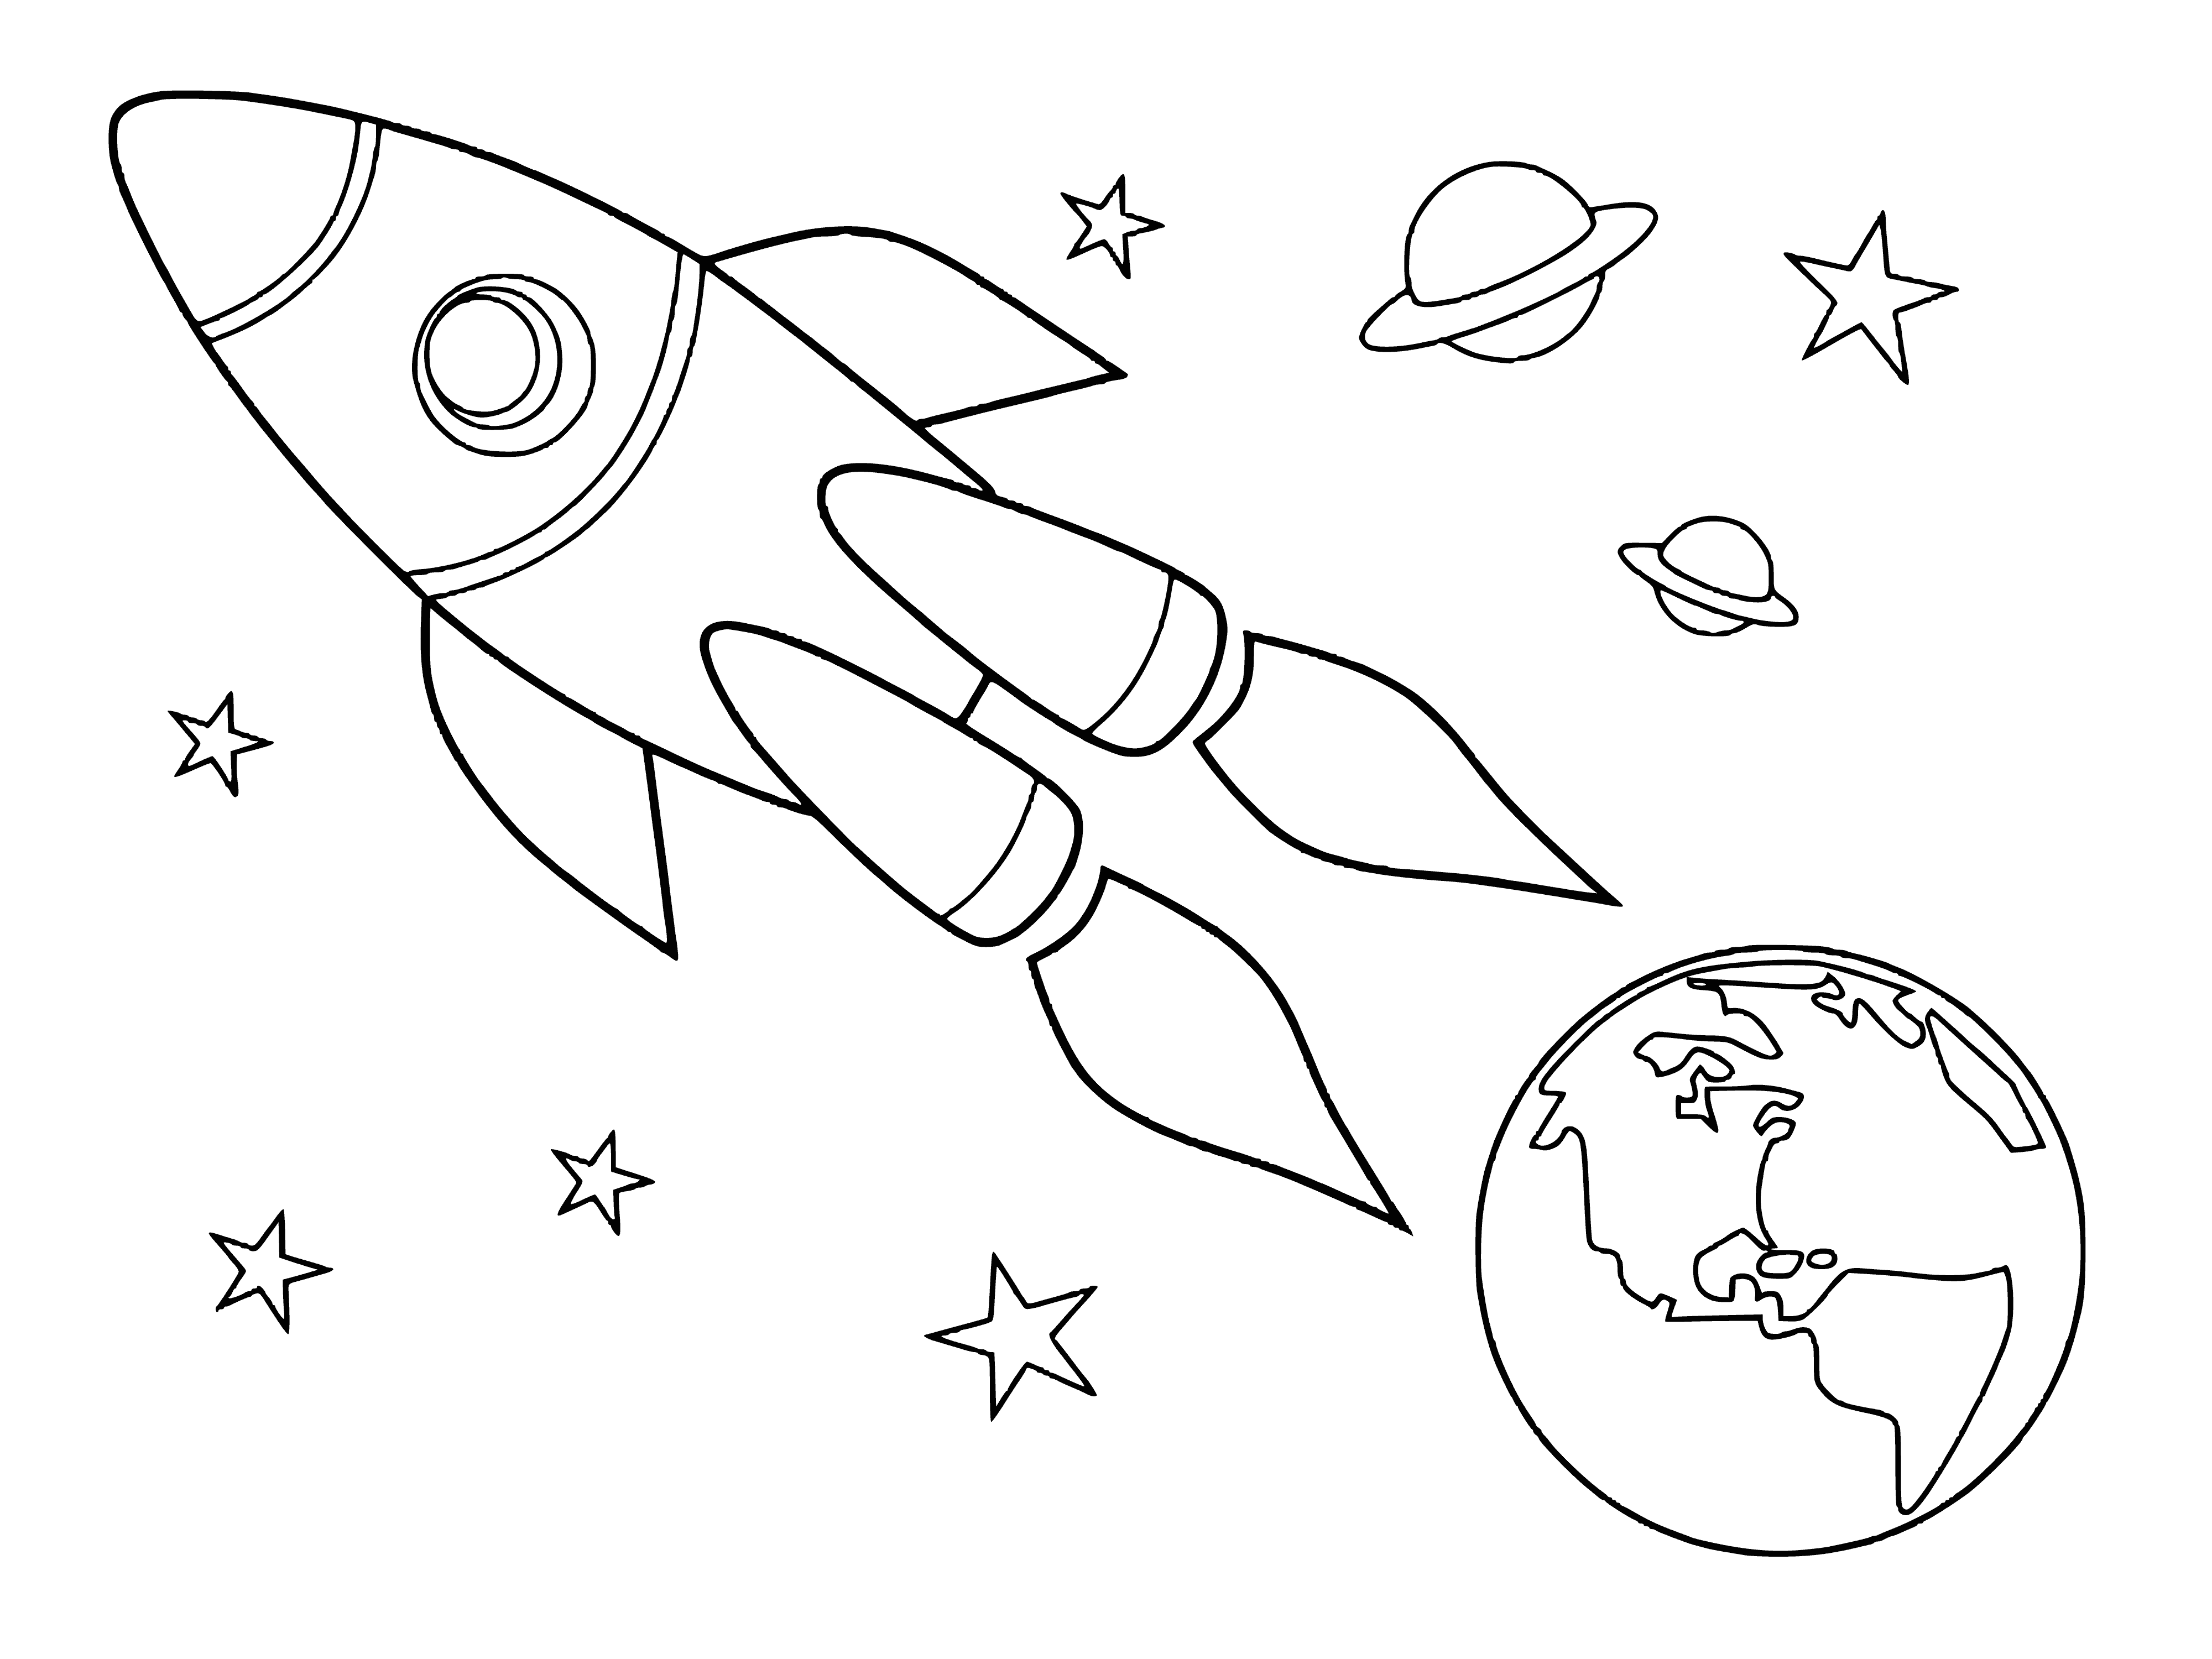 The rocket flies away from the Earth coloring page